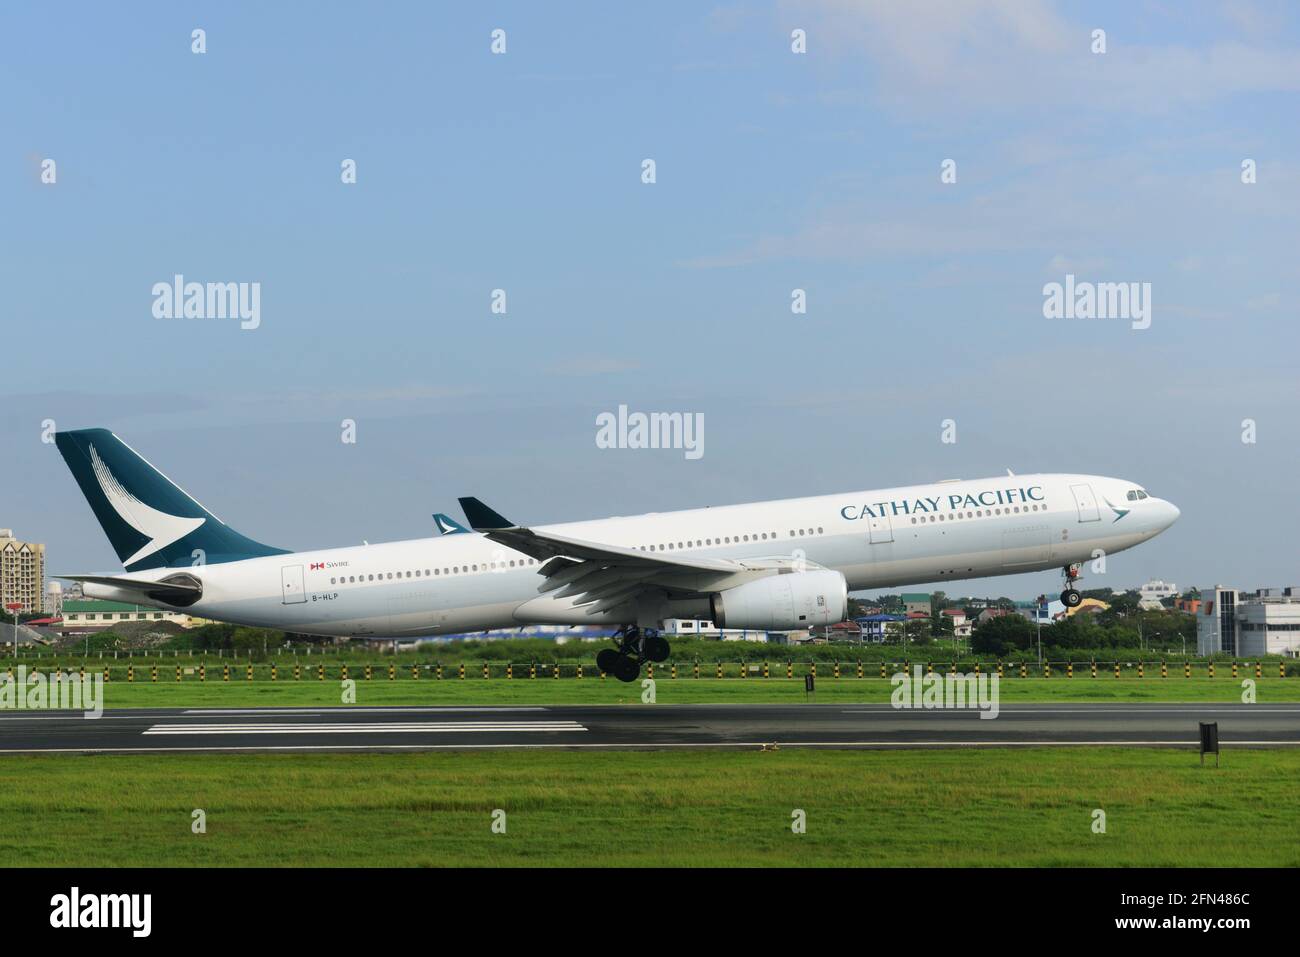 A Cathay Pacific aircraft landing in Manila, The Philippines. Stock Photo